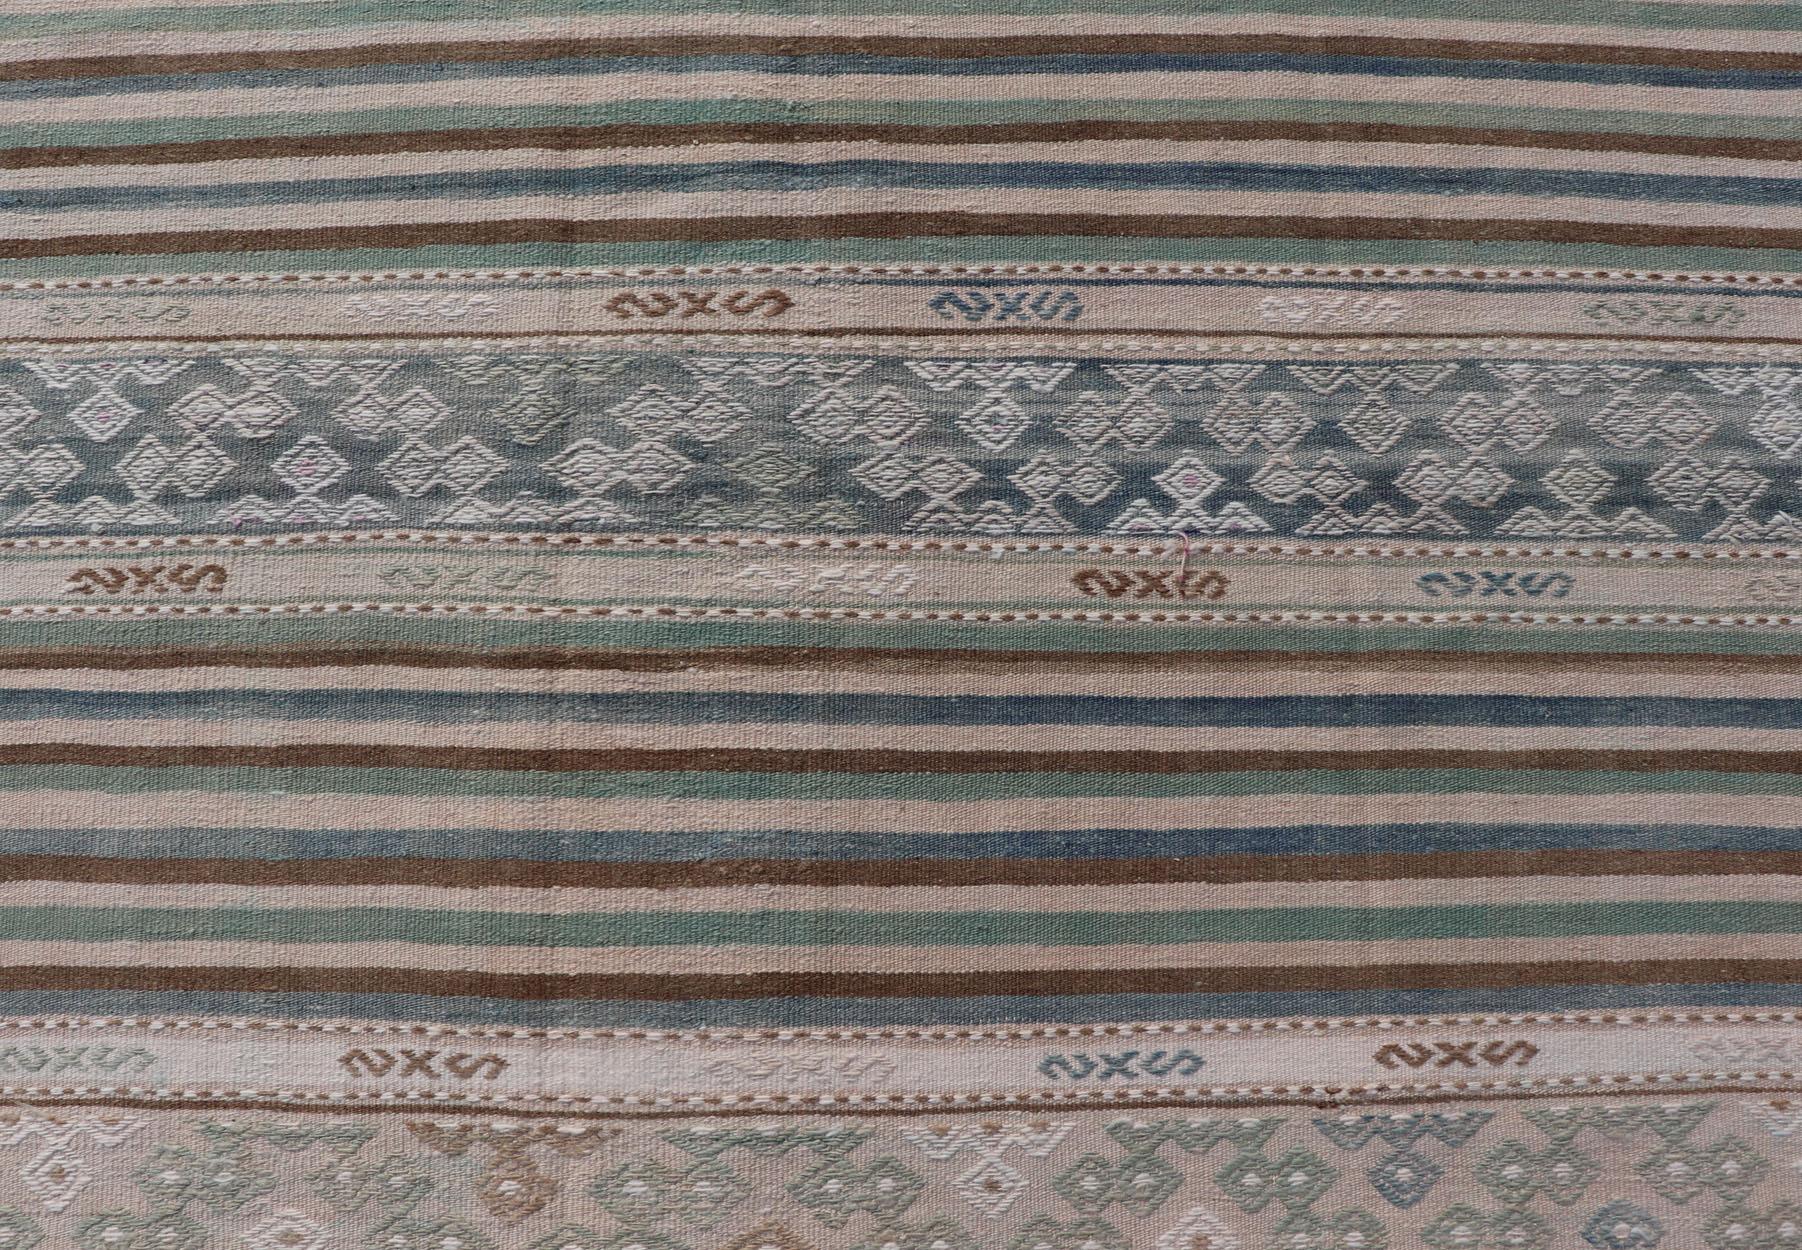 Measures: 5'7 x 9'9 
Turkish Flat-Weave Kilim with Stripes and Embroideries In Blue, Green, and Cream. Keivan Woven Arts / rug EN-13966, country of origin / type: Turkey / Kilim, circa 1950
This vintage Turkish Kilim rug features a contemporary